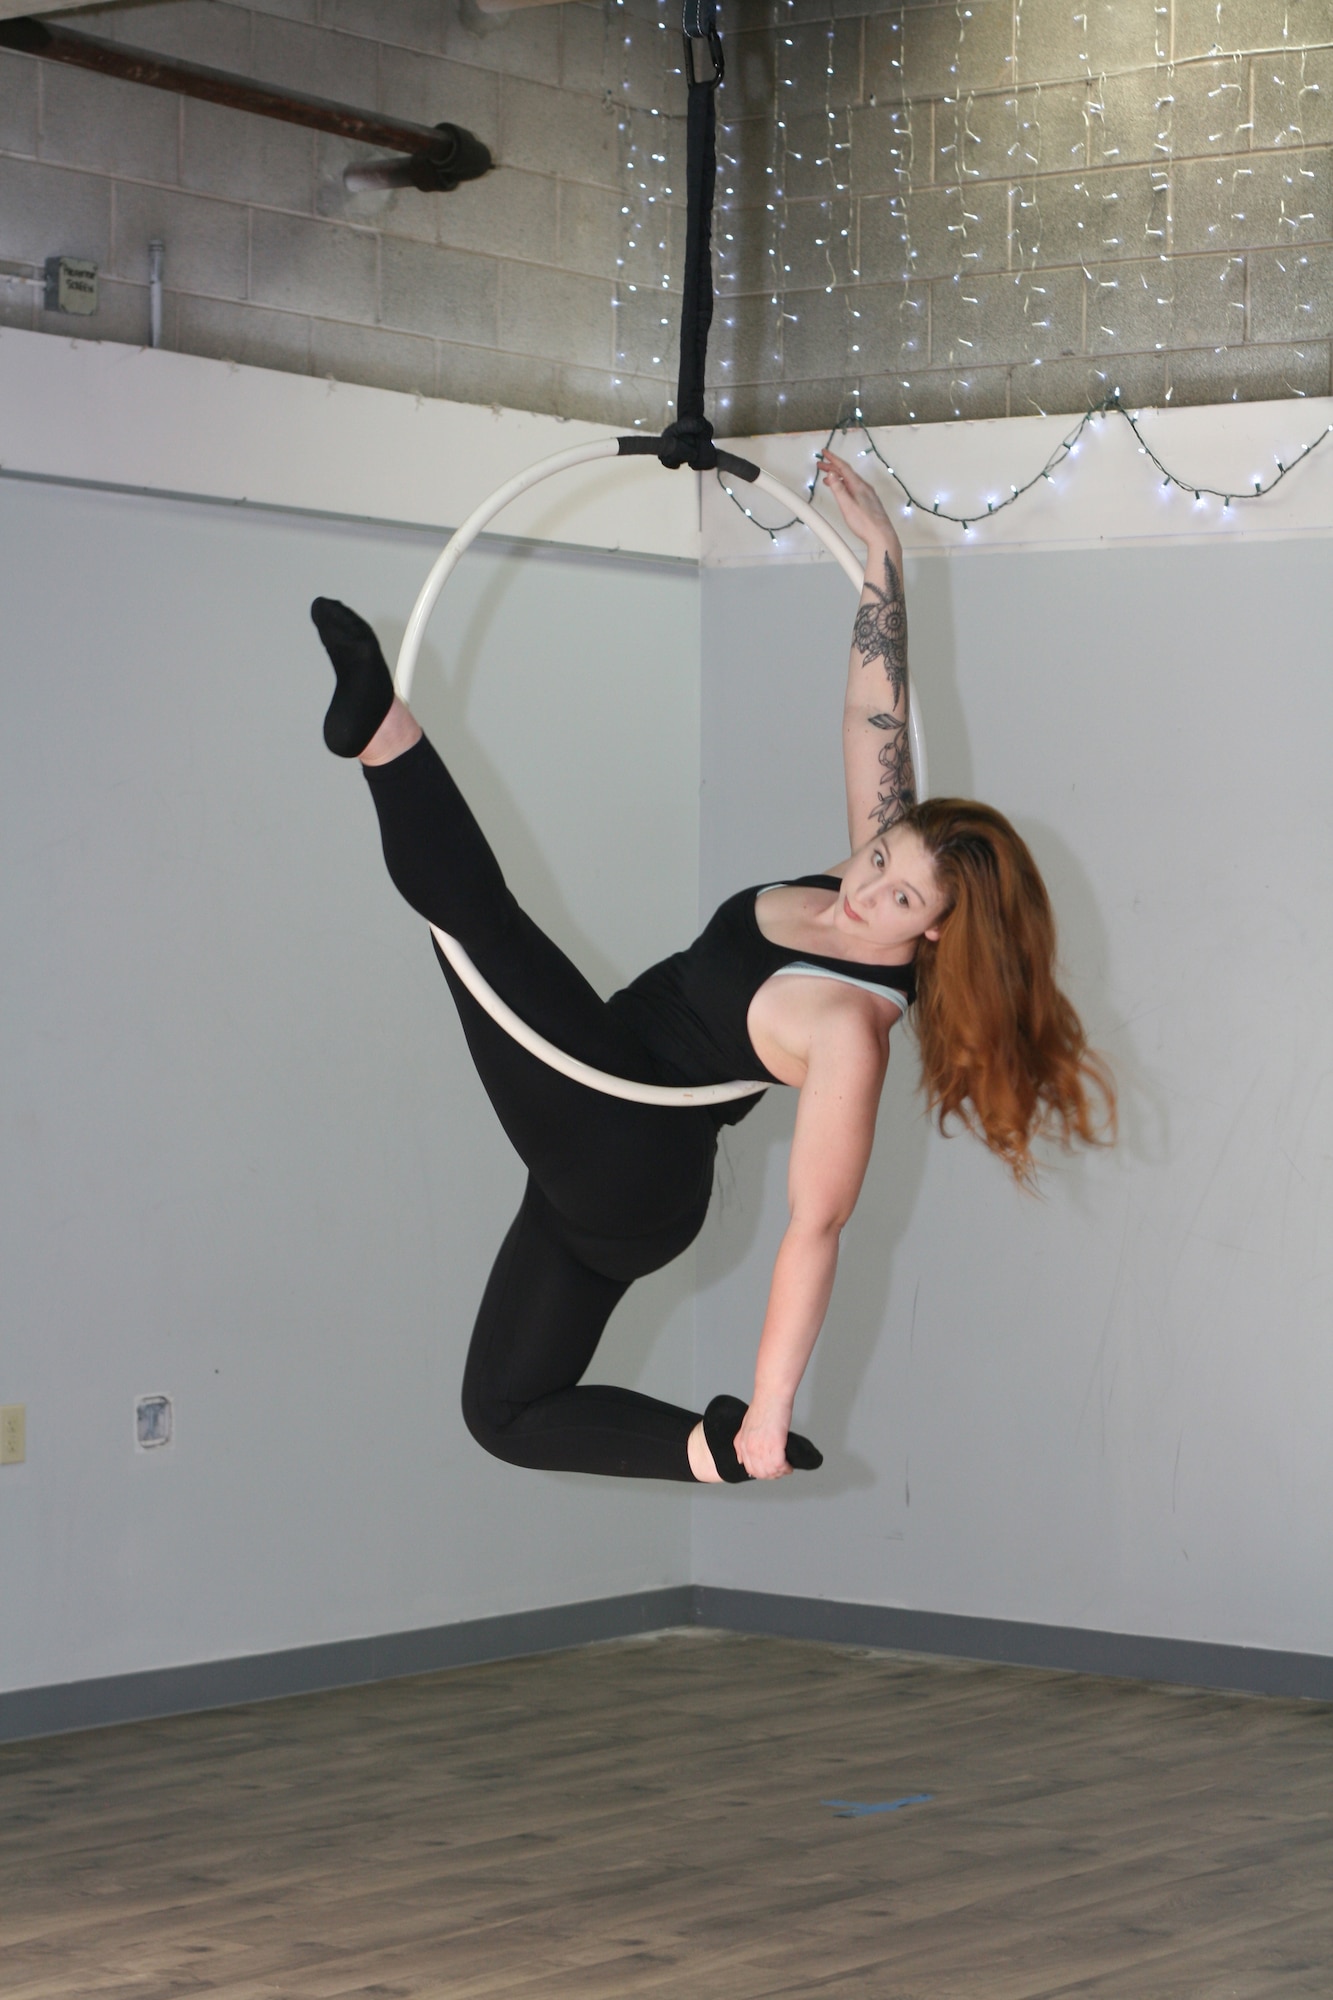 Staff Sgt. Rachel Loftis, a public affairs specialist with the 193rd Special Operations Wing, Middletown, Pa., completes a lyra workout, also known as aerial hoop - the art of performing acrobatics using a hoop connected to the ceiling. Loftis first pursued aerial acrobatics while stationed at Nellis Air Force Base, Las Vegas, which she attributes to the robust local “circus community” there and the desire to find a fitness program that was effective and held her interest. (U.S. Air National Guard photo by Tech. Sgt. Claire Forbes)